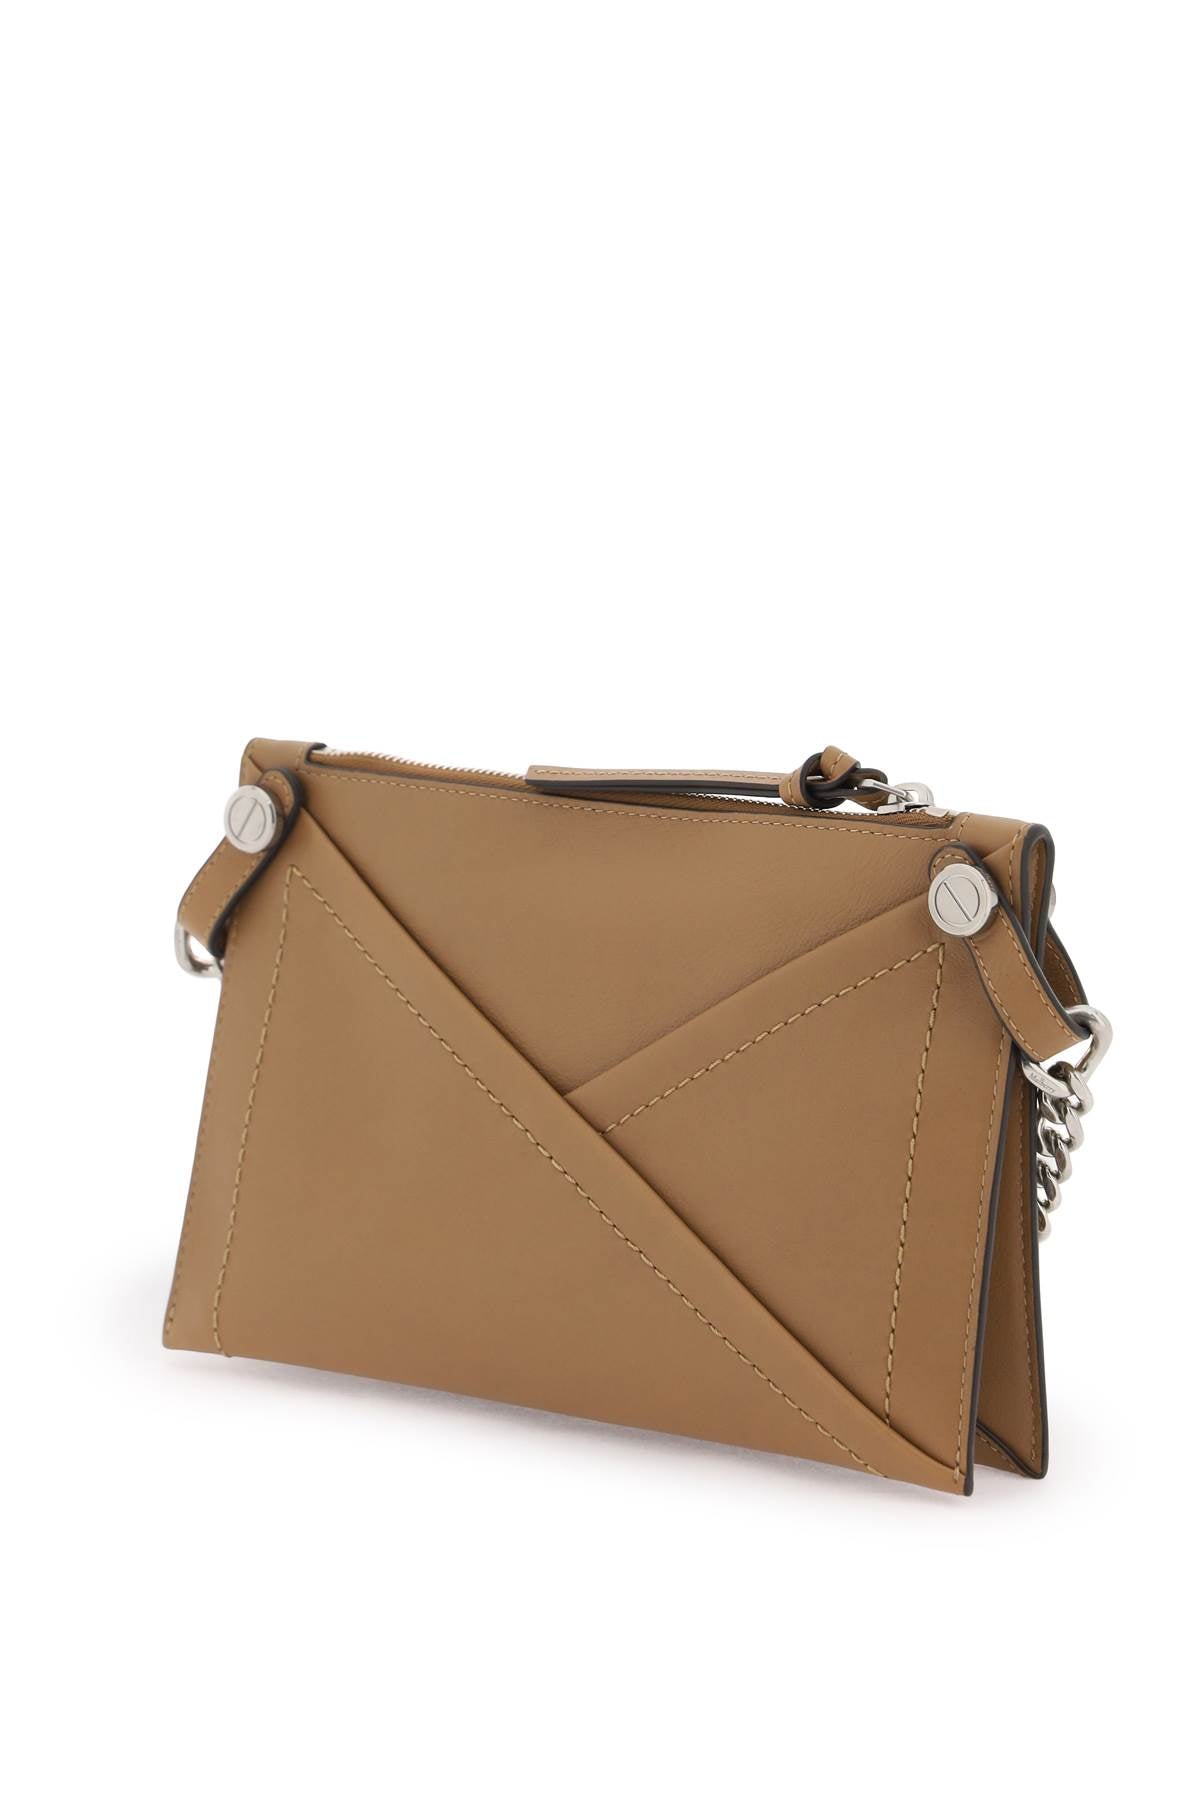 Shop Mulberry Brown Leather Envelope-like Handbag With Swappable Handles